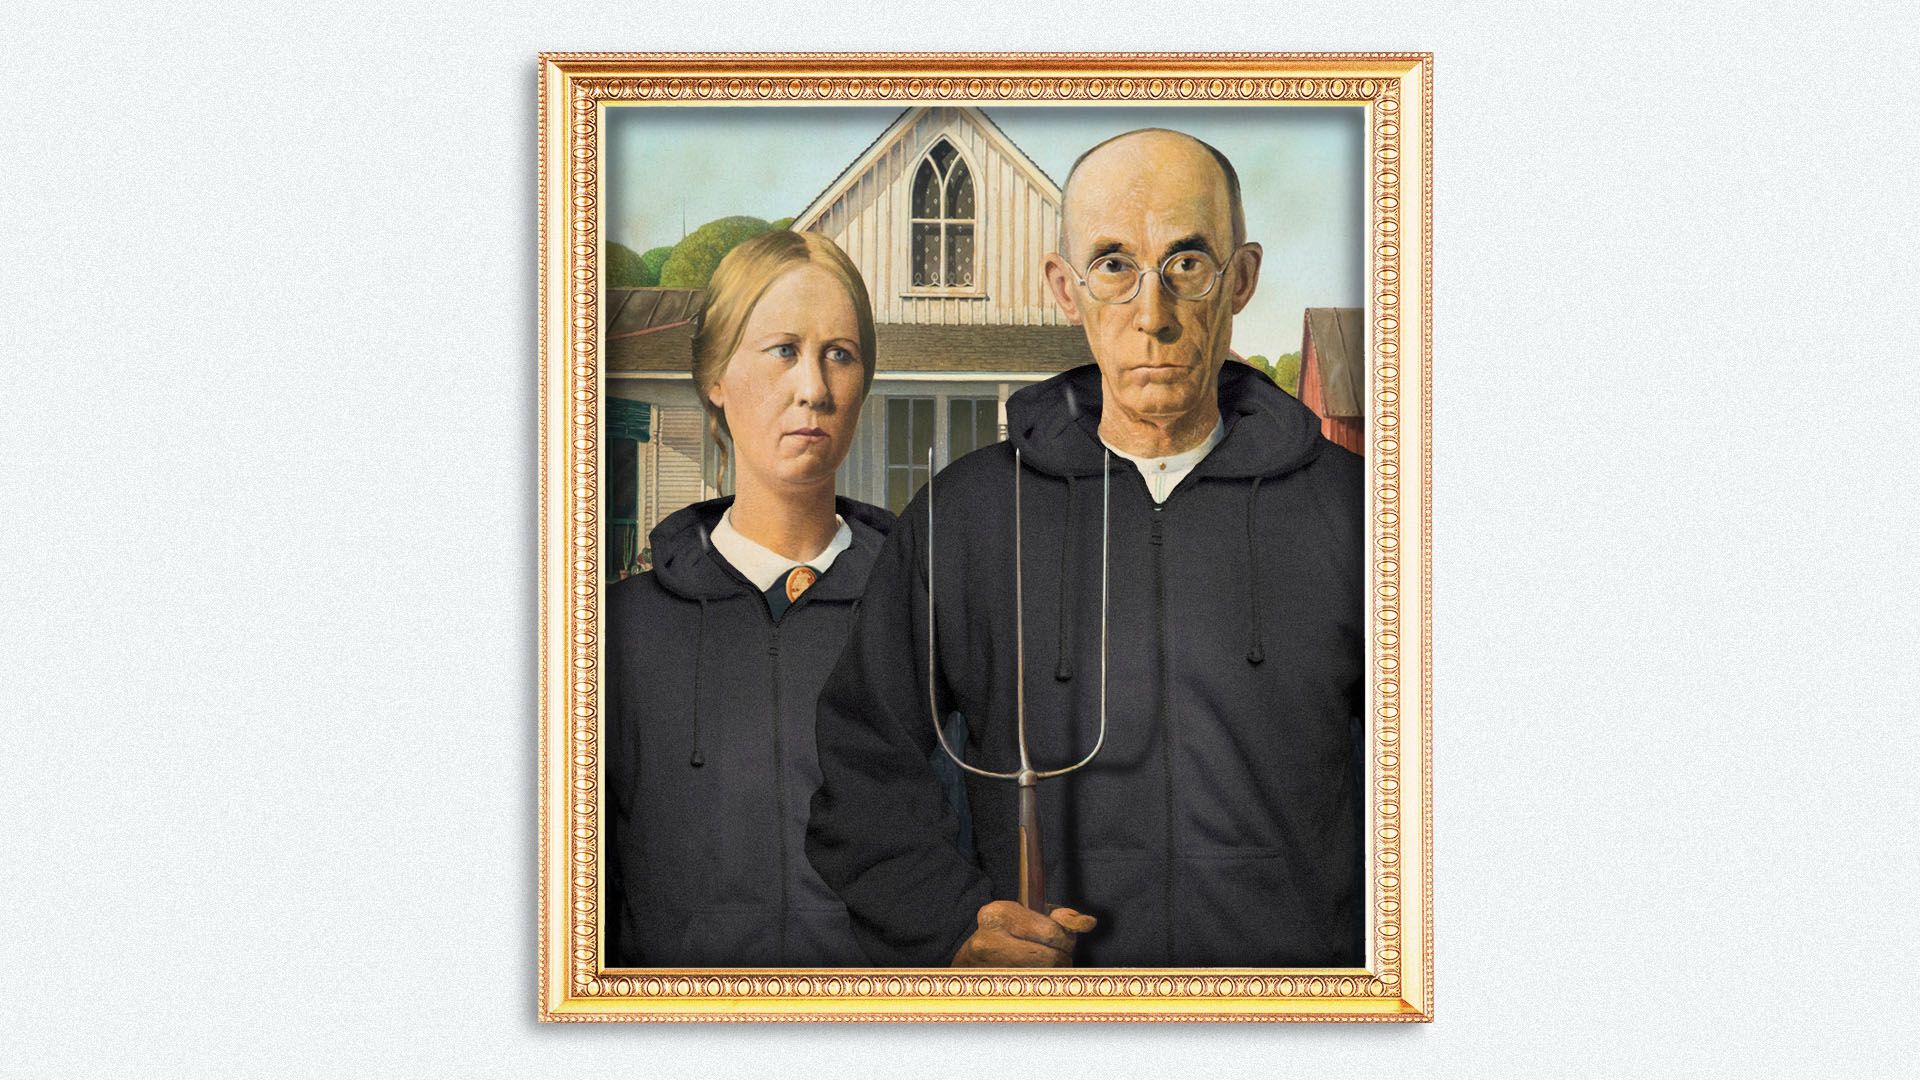 llustration of the painting American Gothic with the subjects wearing hoodies.